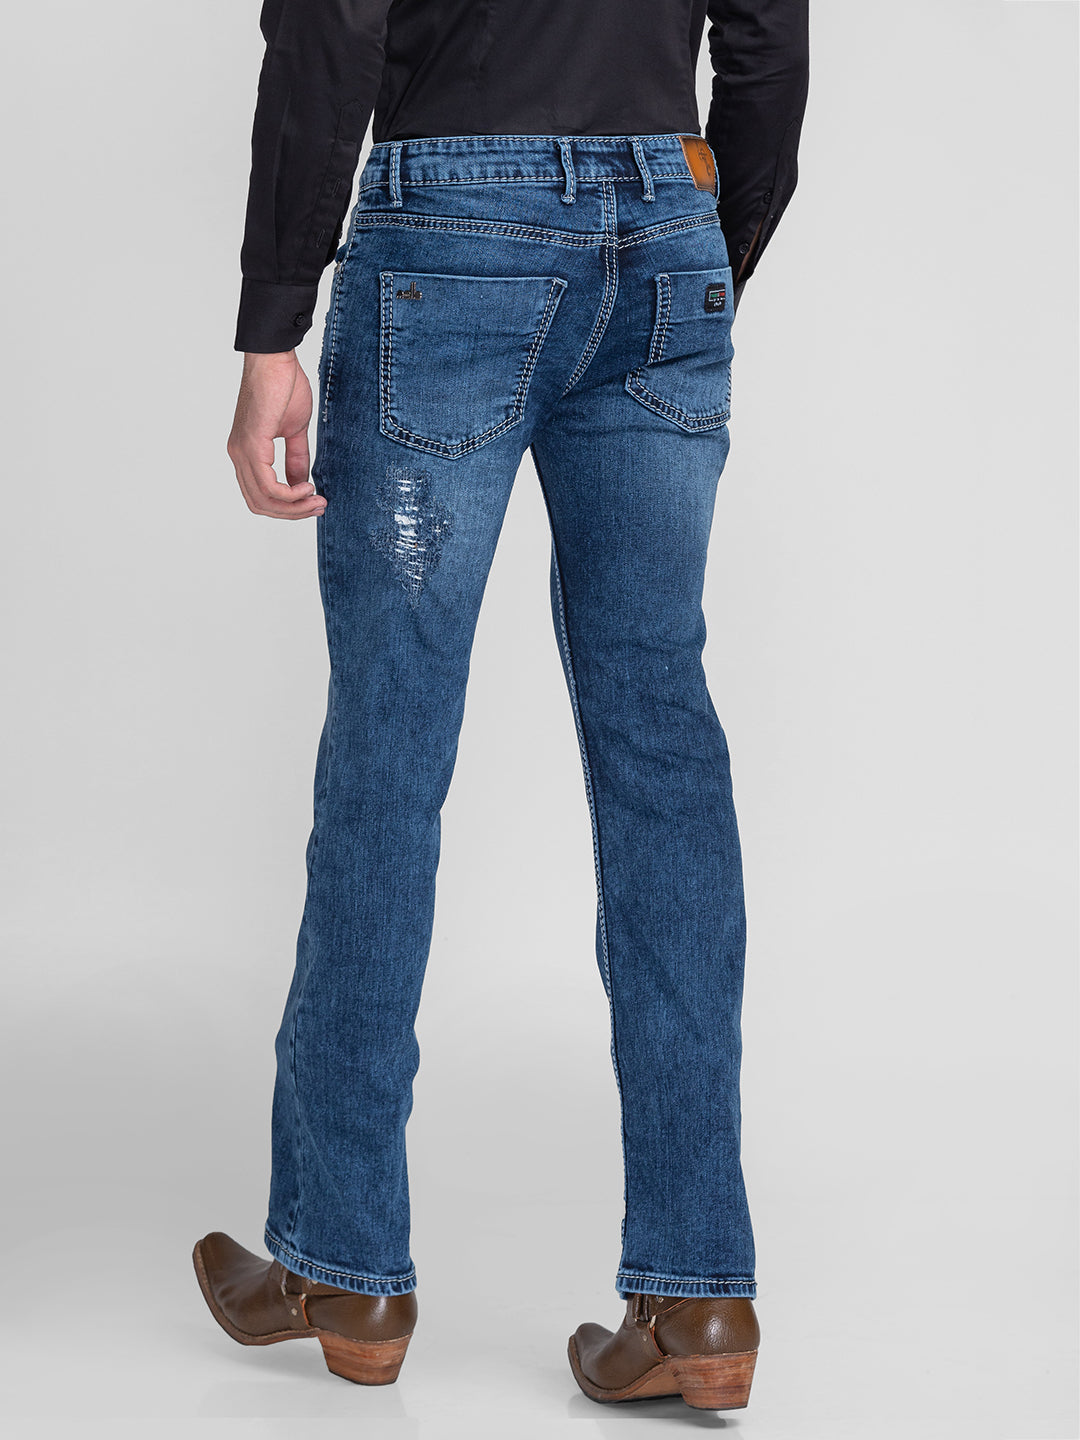 Blue Distressed Bootcut Jeans for Men